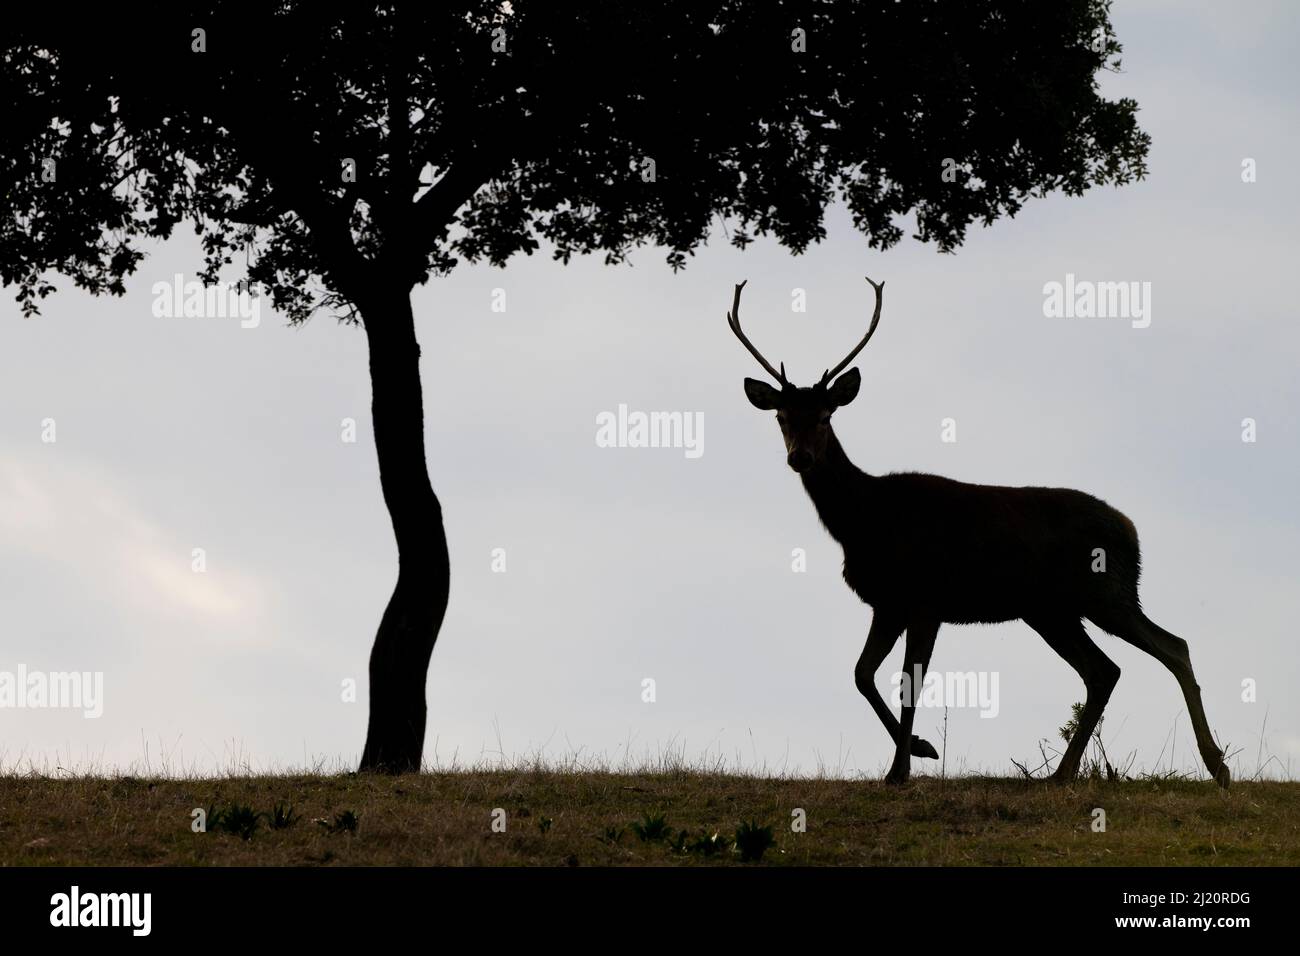 Red deer stag (Cervus elaphus) and a Holm oak tree (Quercus ilex) silhouetted Parque Natural Sierra de Andujar, Andalucia, Spain. January. Stock Photo